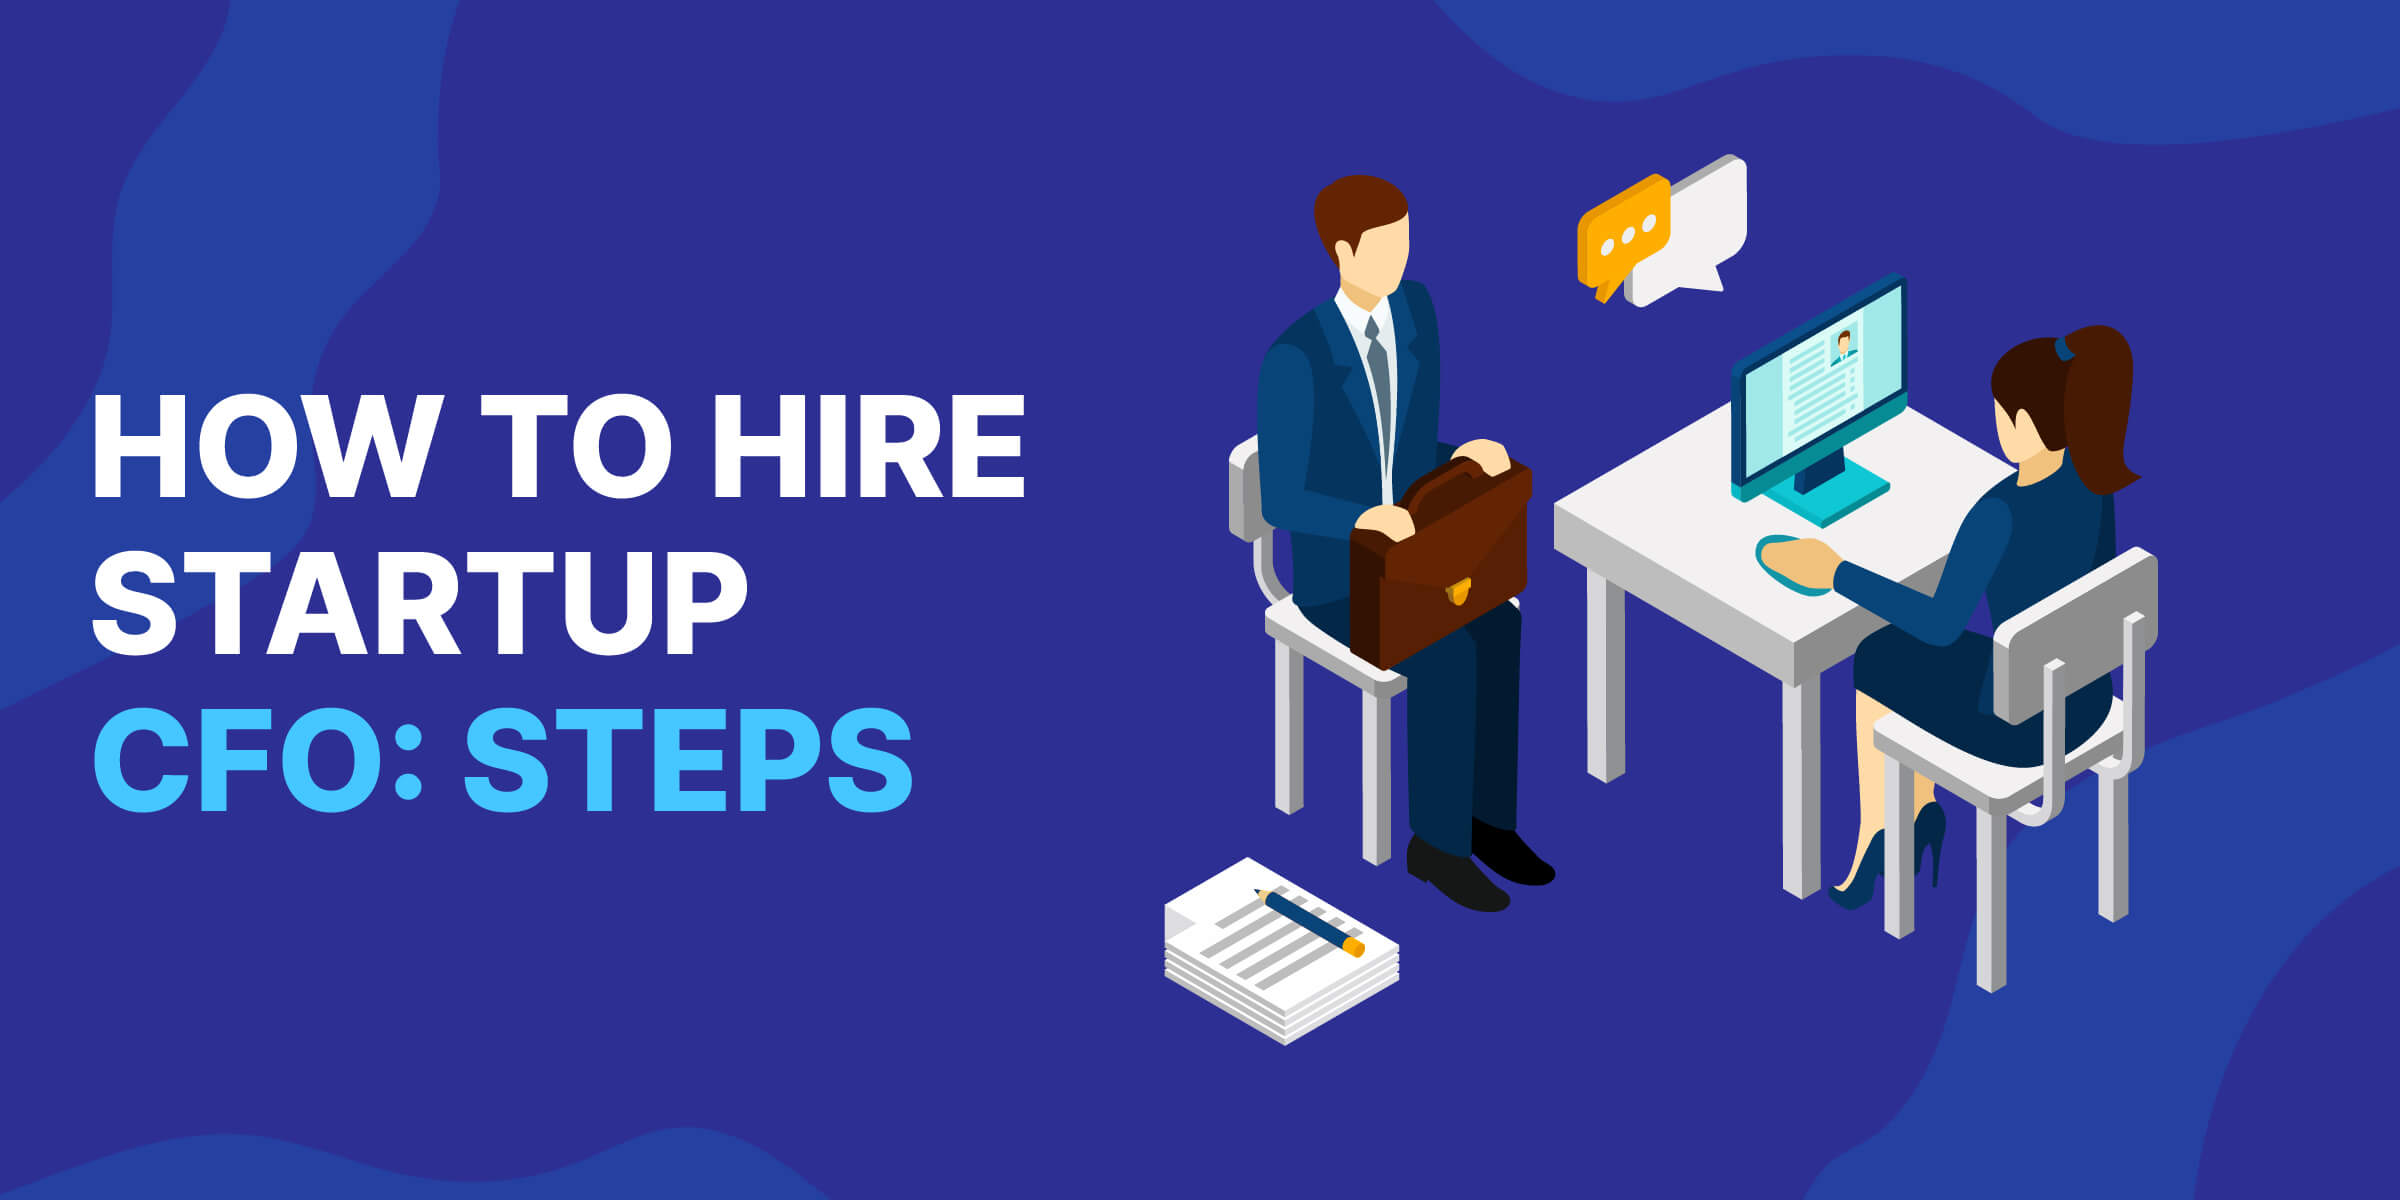 How to Hire Startup CFO Steps